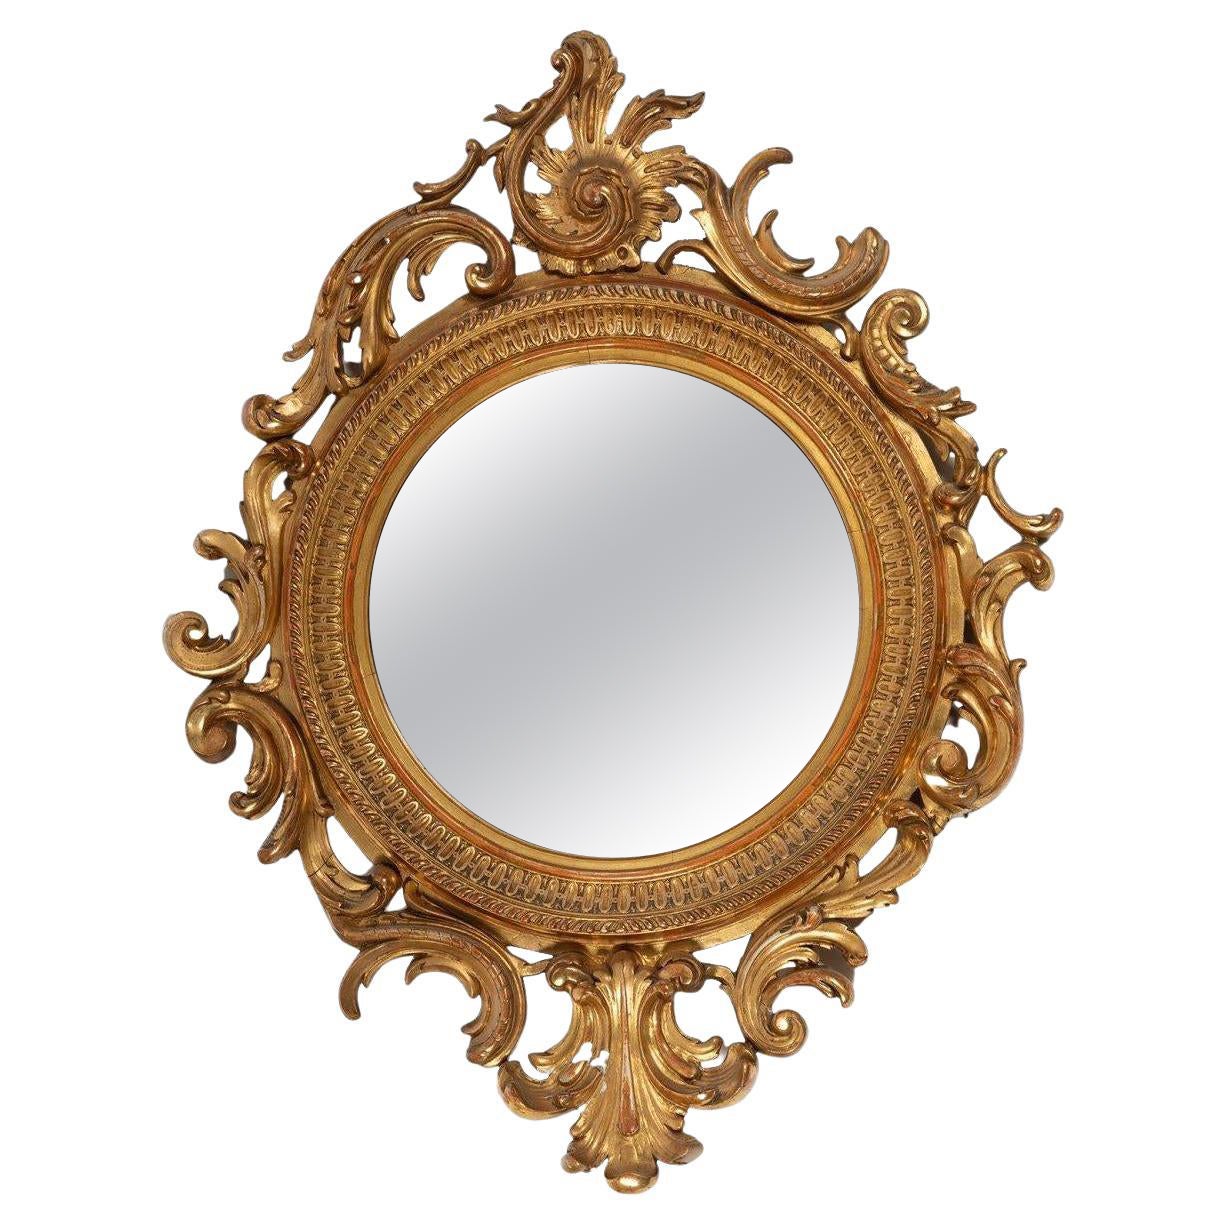 19th century French Empire Circular Mirror in Giltwood frame For Sale